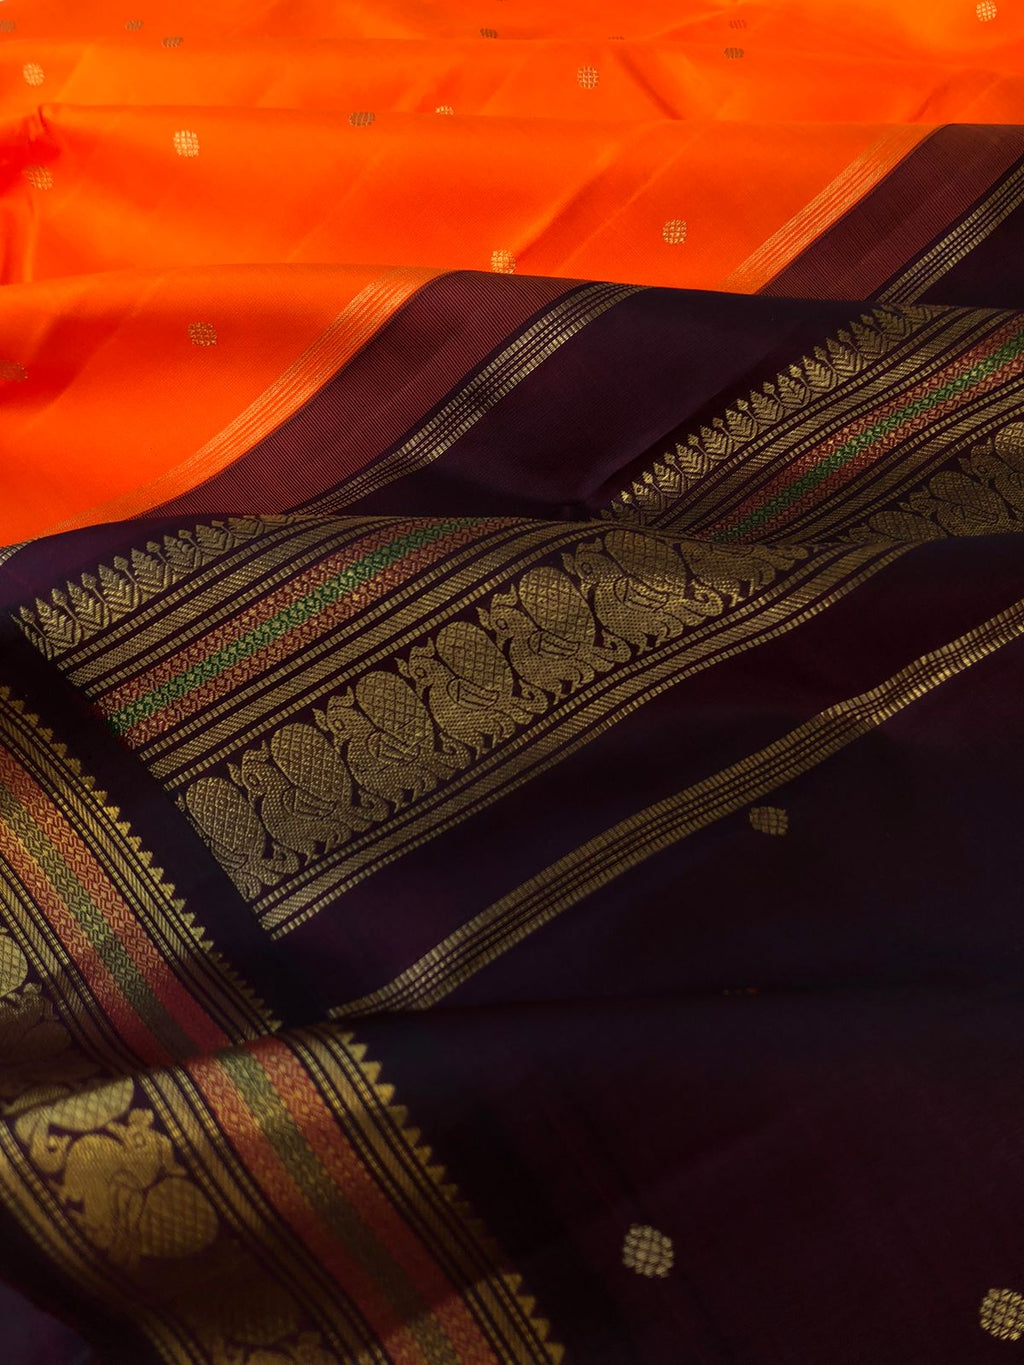 Varam - Kanchivarams Inspired from our Grandmother’s Trunk - beautiful fanta orange and deep beetle nut brown pallu with korvai woven annapakshi borders